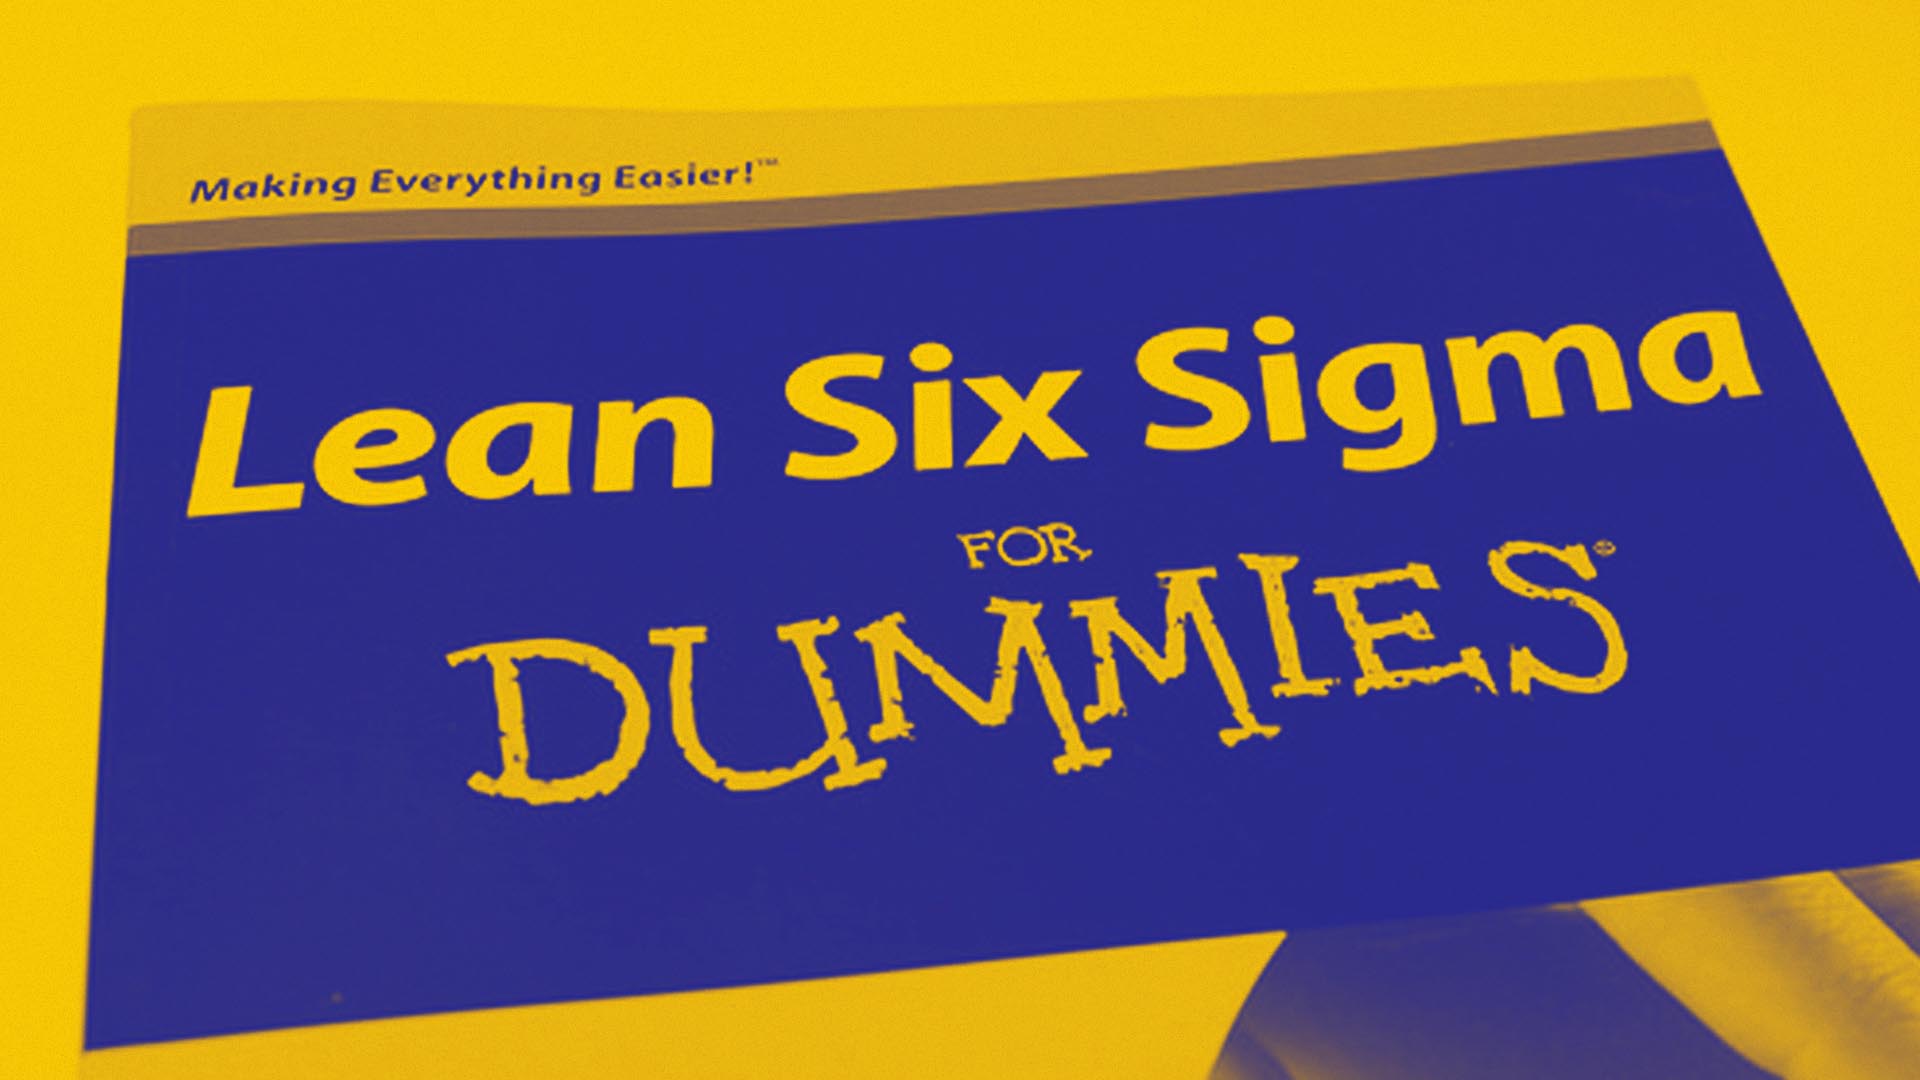 Is Lean Six Sigma a new career opportunity?